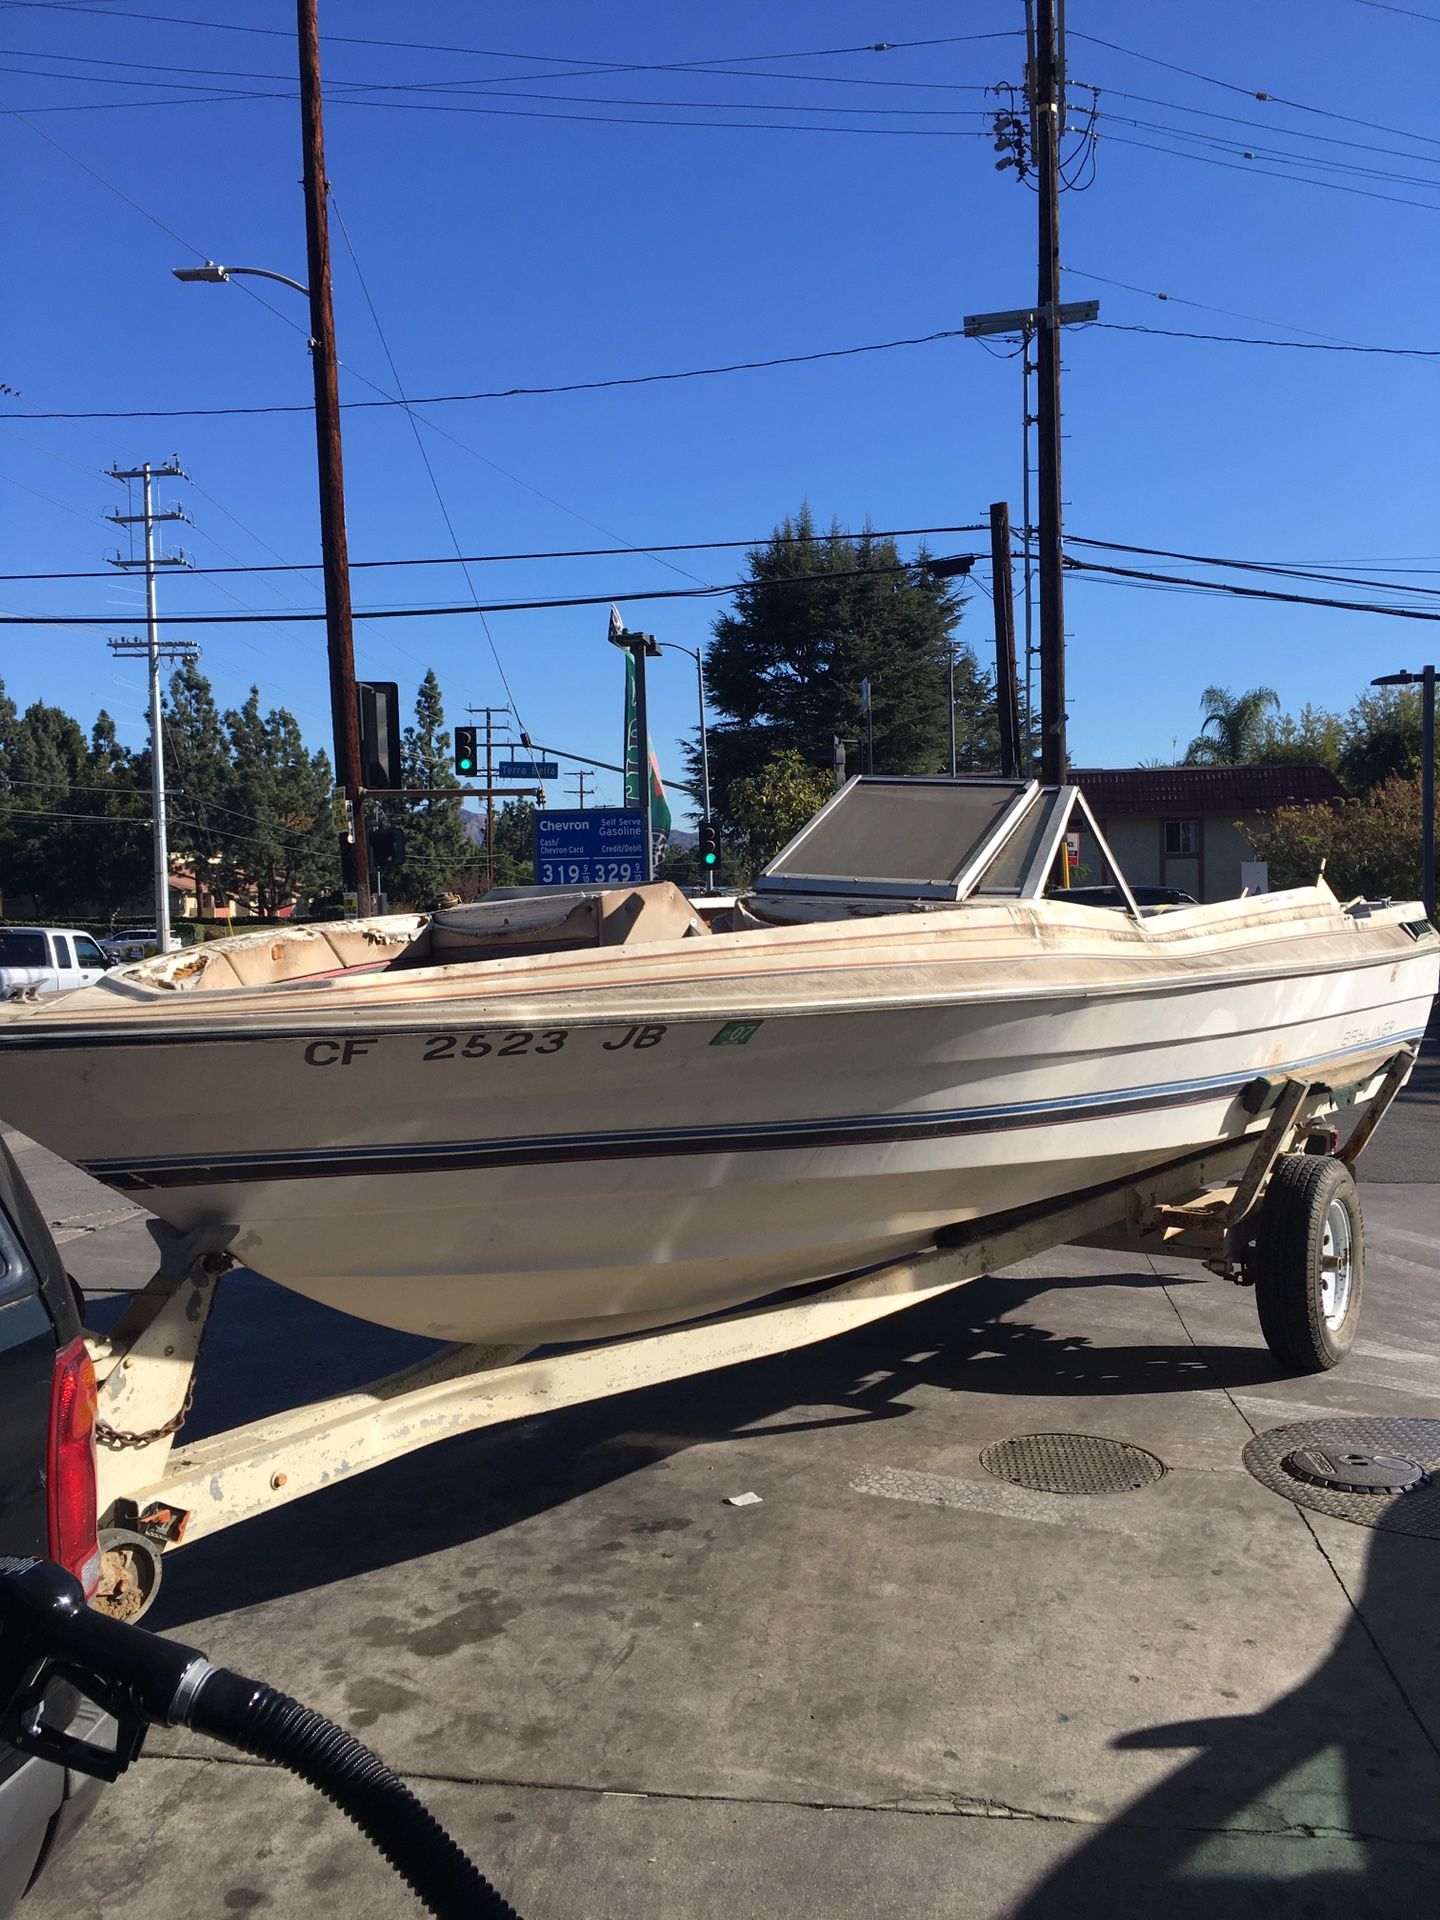 Free 1984 Bayliner Without Trailer